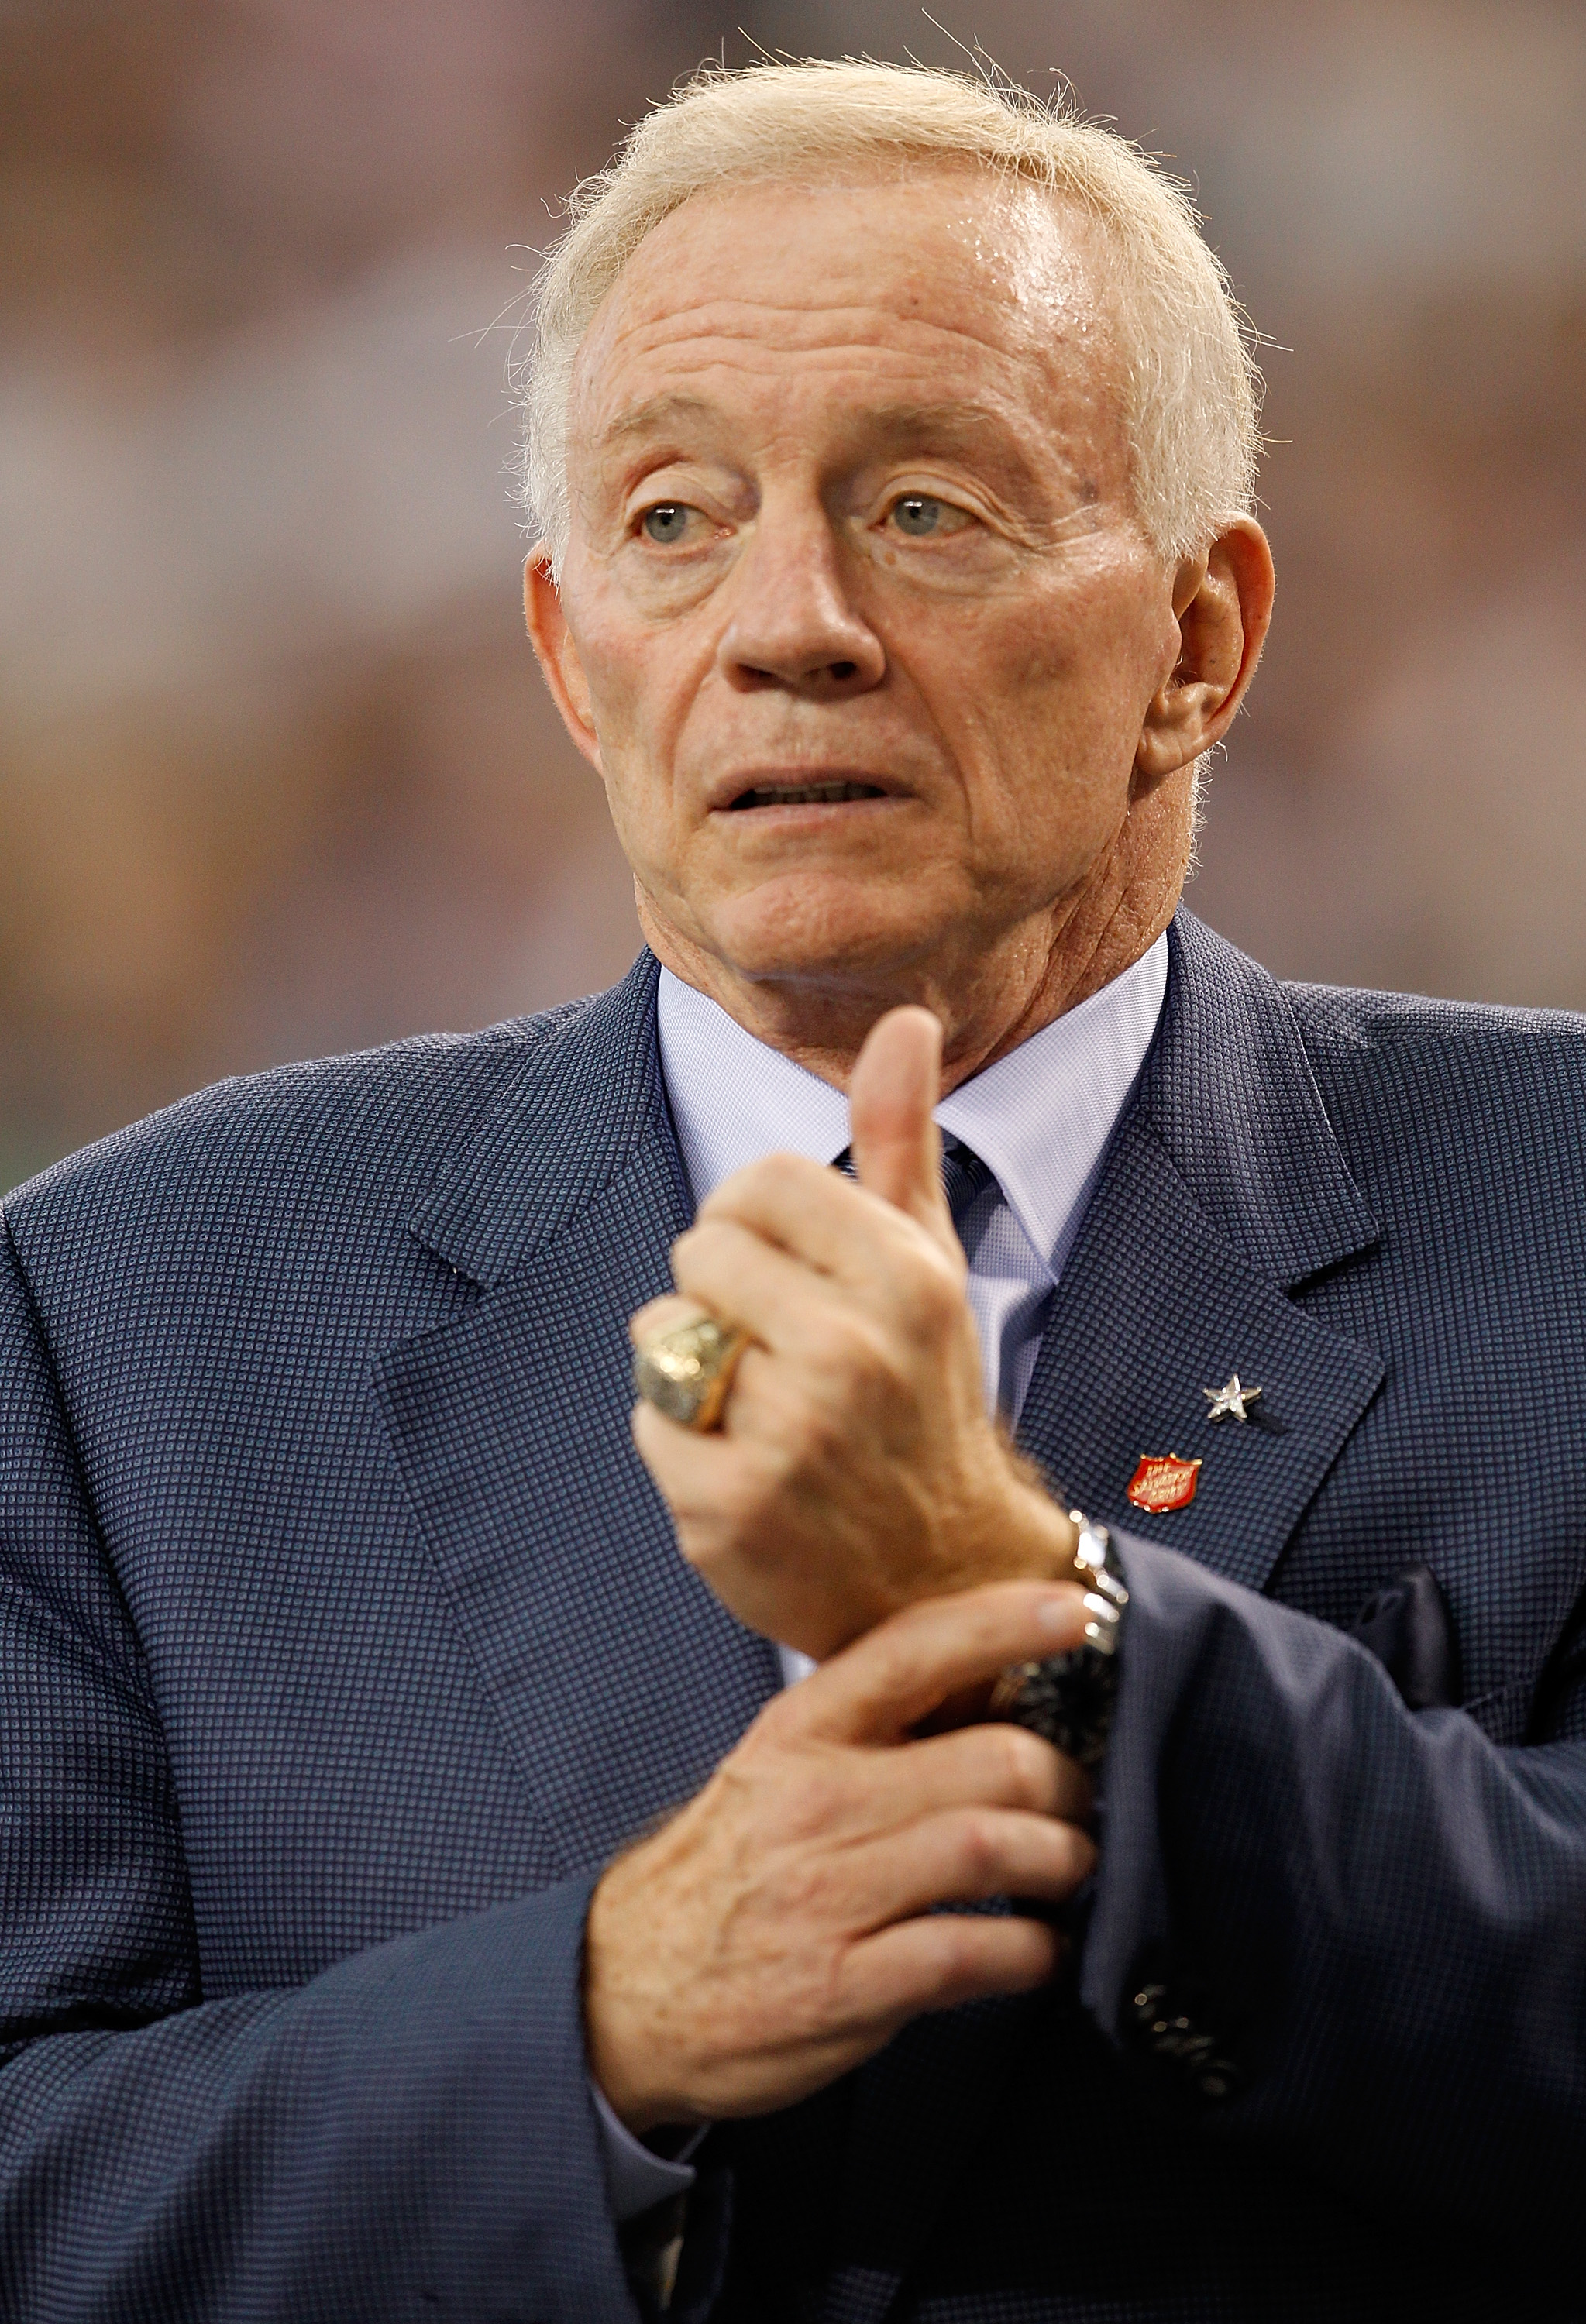 ARLINGTON, TX - NOVEMBER 21:  Dallas Cowboys owner Jerry Jones watches as the Cowboys take on the Detroit Lions at Cowboys Stadium on November 21, 2010 in Arlington, Texas.  (Photo by Tom Pennington/Getty Images)